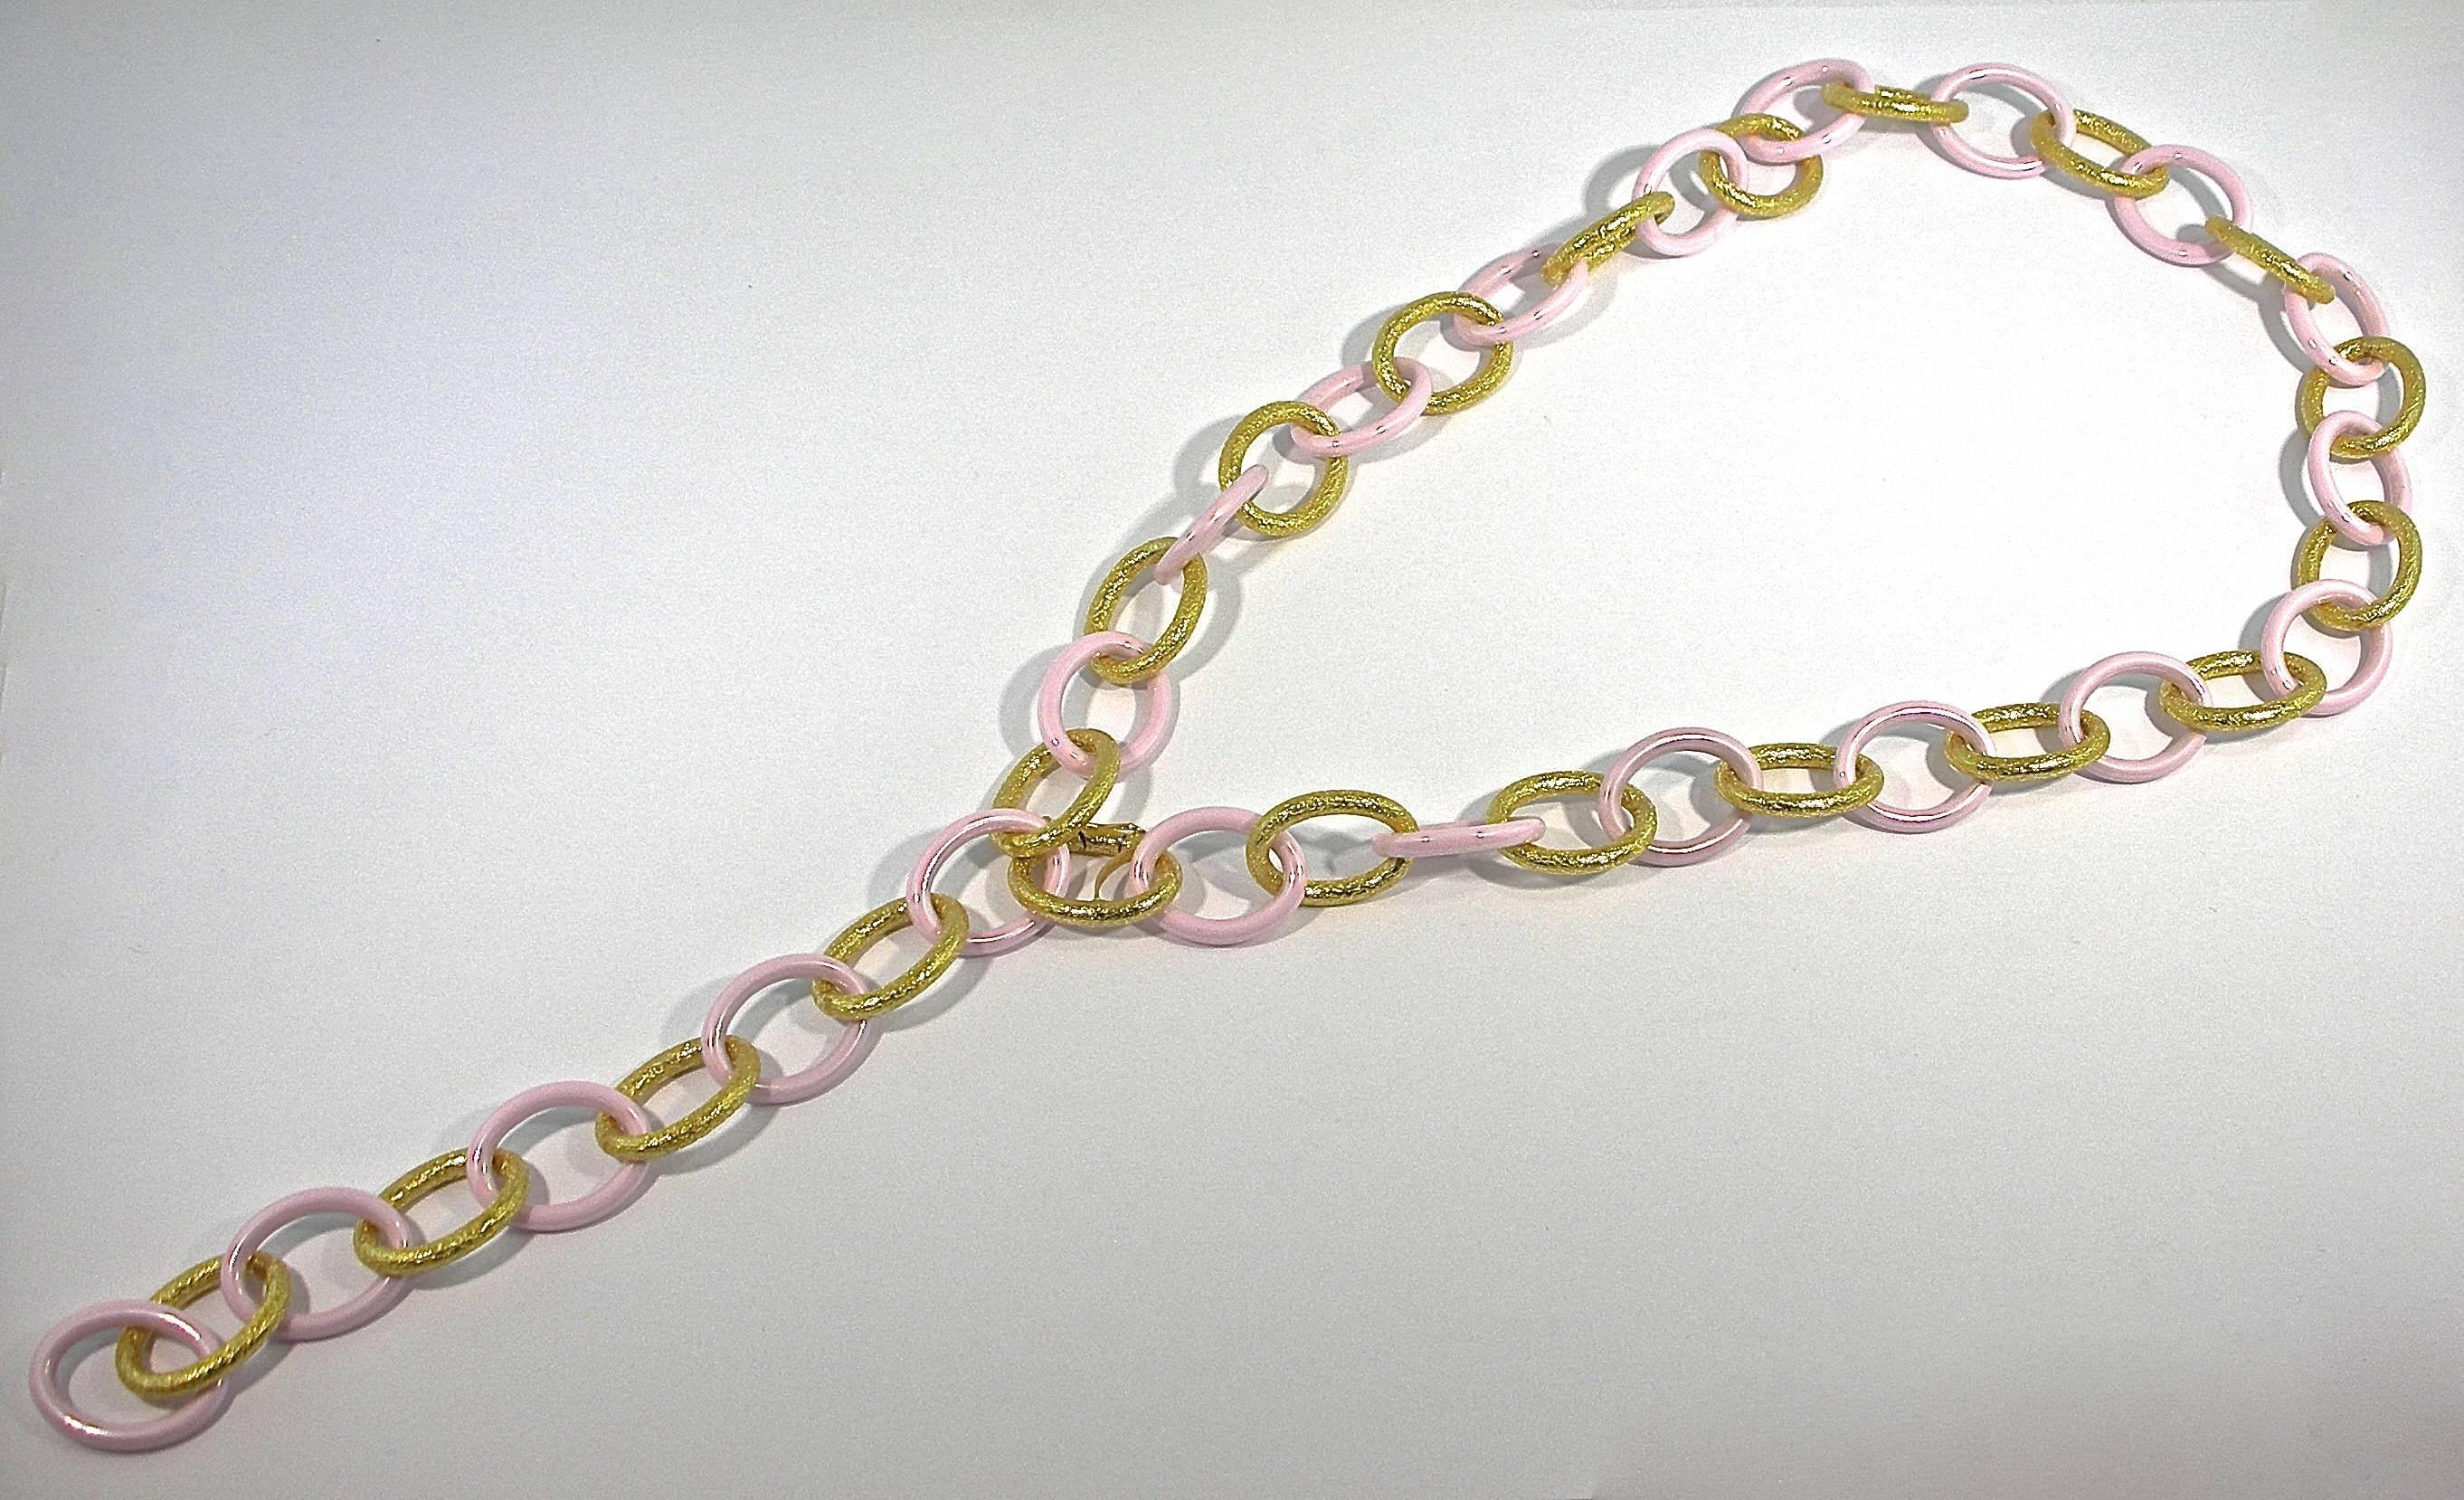 Jona design collection, hand crafted in Italy, 18k yellow gold and pink high-tech ceramic, 59 cm long, link necklace..
With a hardness approaching that of diamond, high-tech ceramic is a highly
scratch-resistant material. Light and biocompatible,